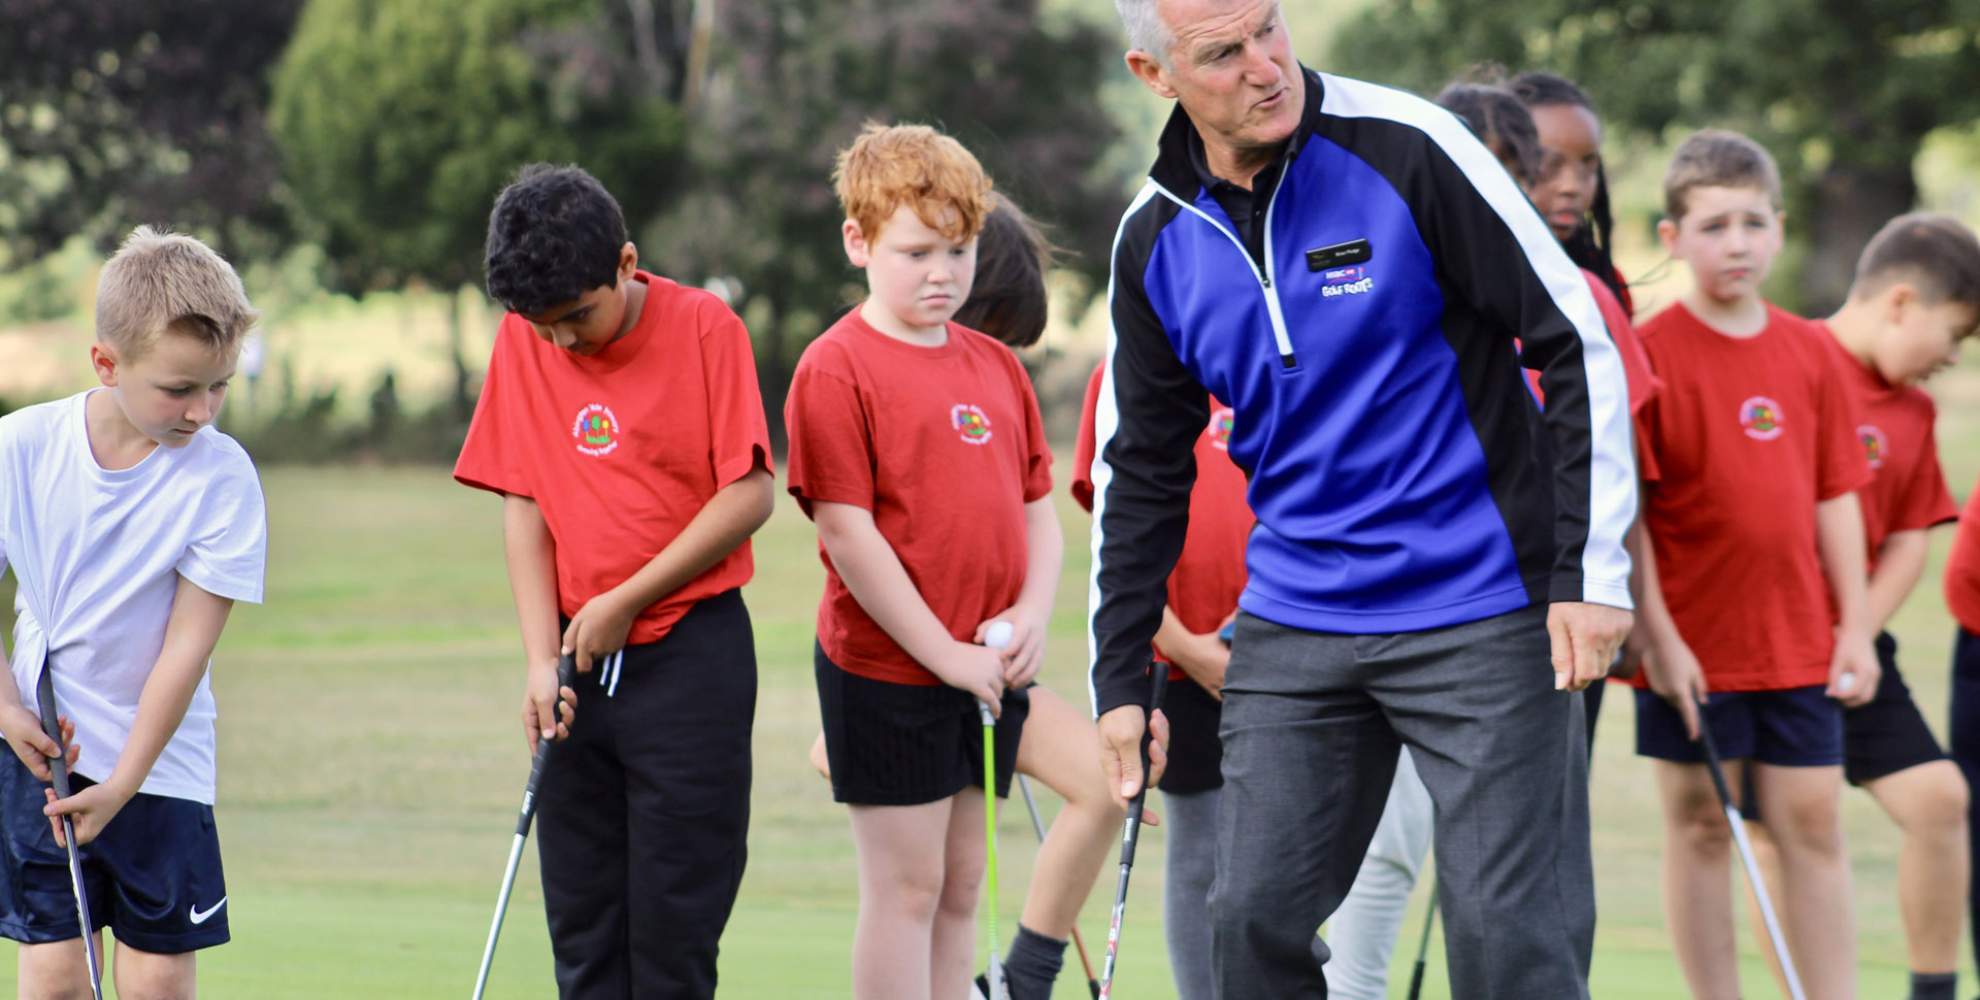 An image of a golf professional coaching junior players